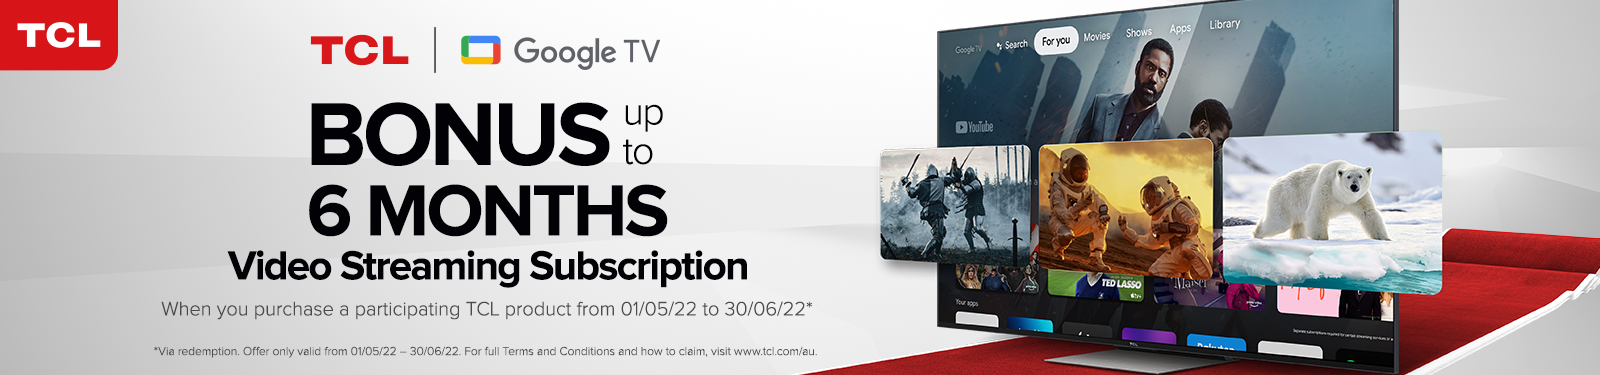 Bonus 6 Months Video Streaming Subscription with selected TCL products